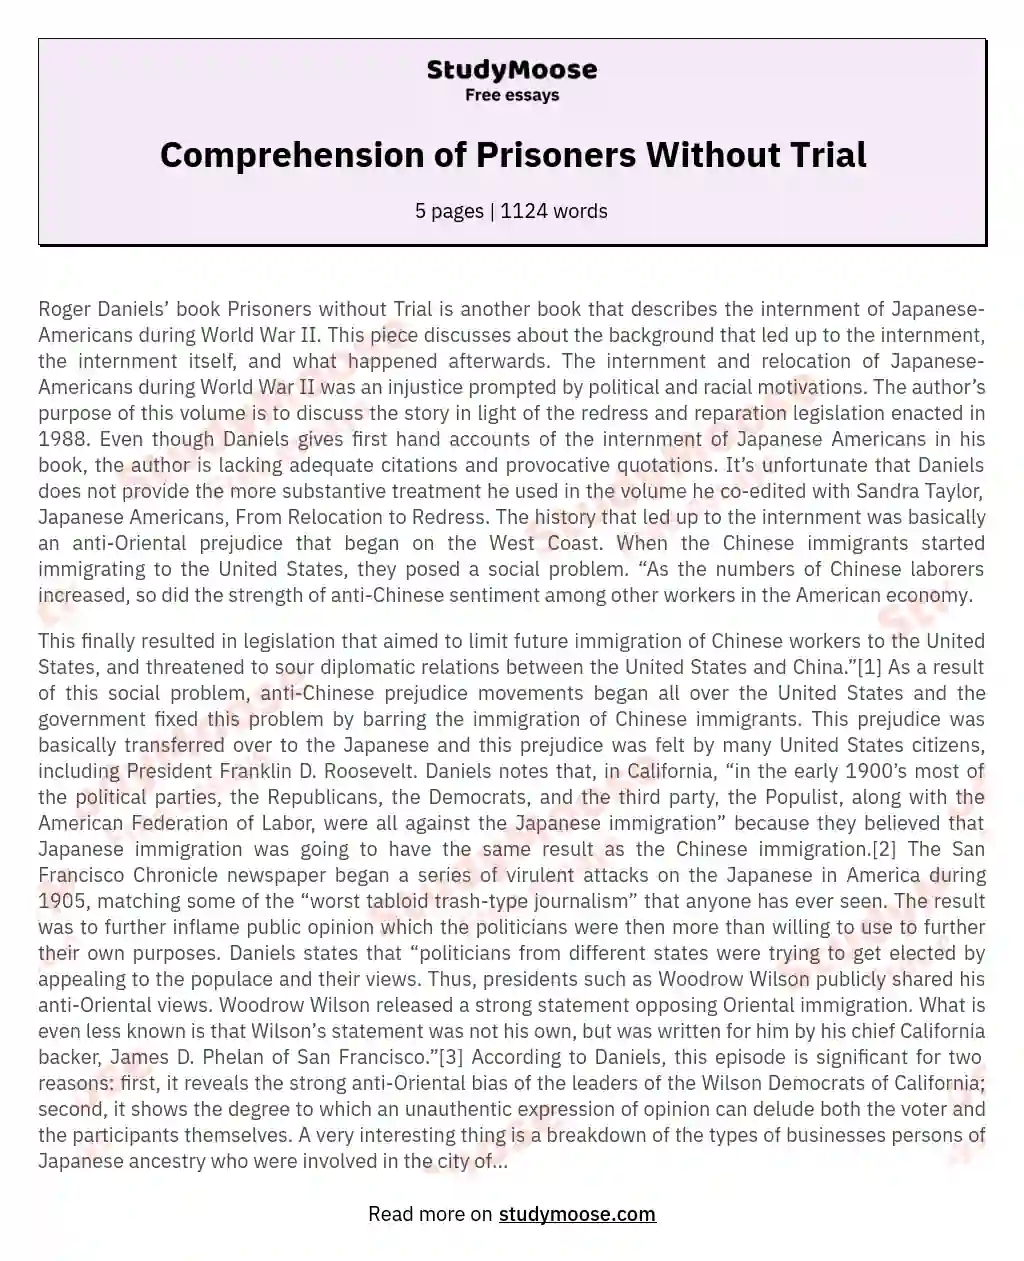 Comprehension of Prisoners Without Trial